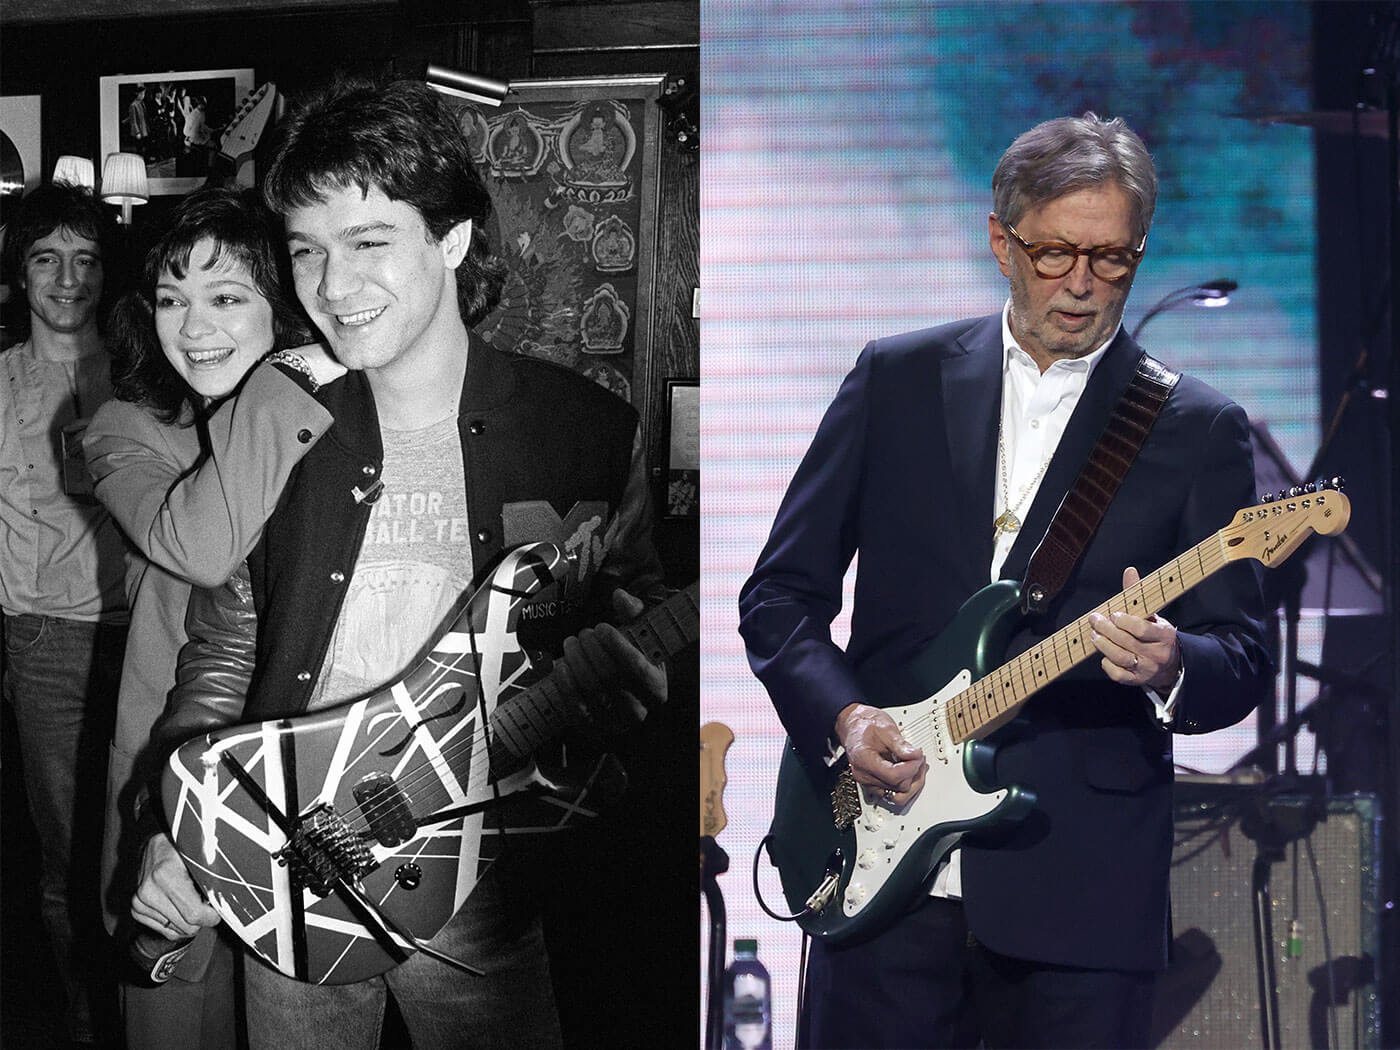 EVH’s ex-wife Valerie Bertinelli on Clapton’s vaccine comments: “Once a dick, always a dick” - Guitar.com